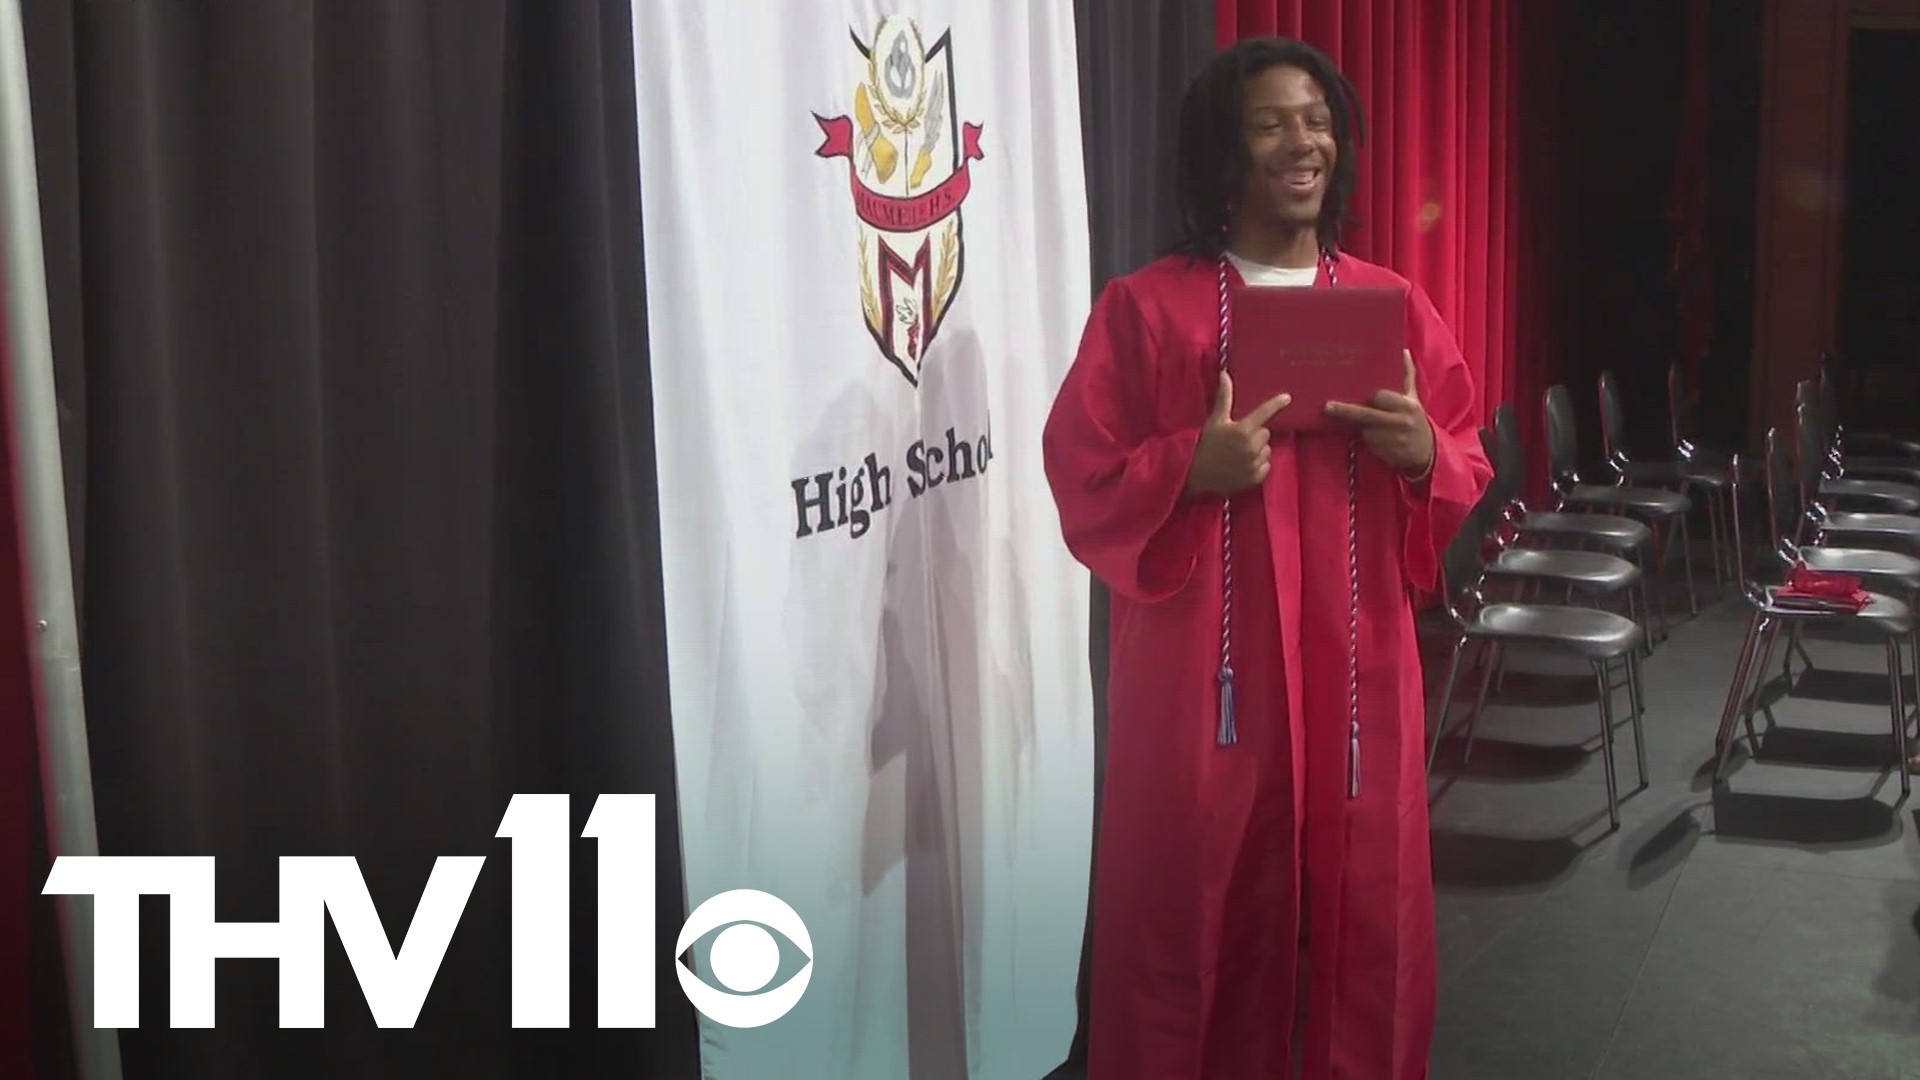 One Arkansas senior missed his graduation after getting into a car accident and being pinned under an 18-wheeler. Now, he was able to have his own special ceremony.